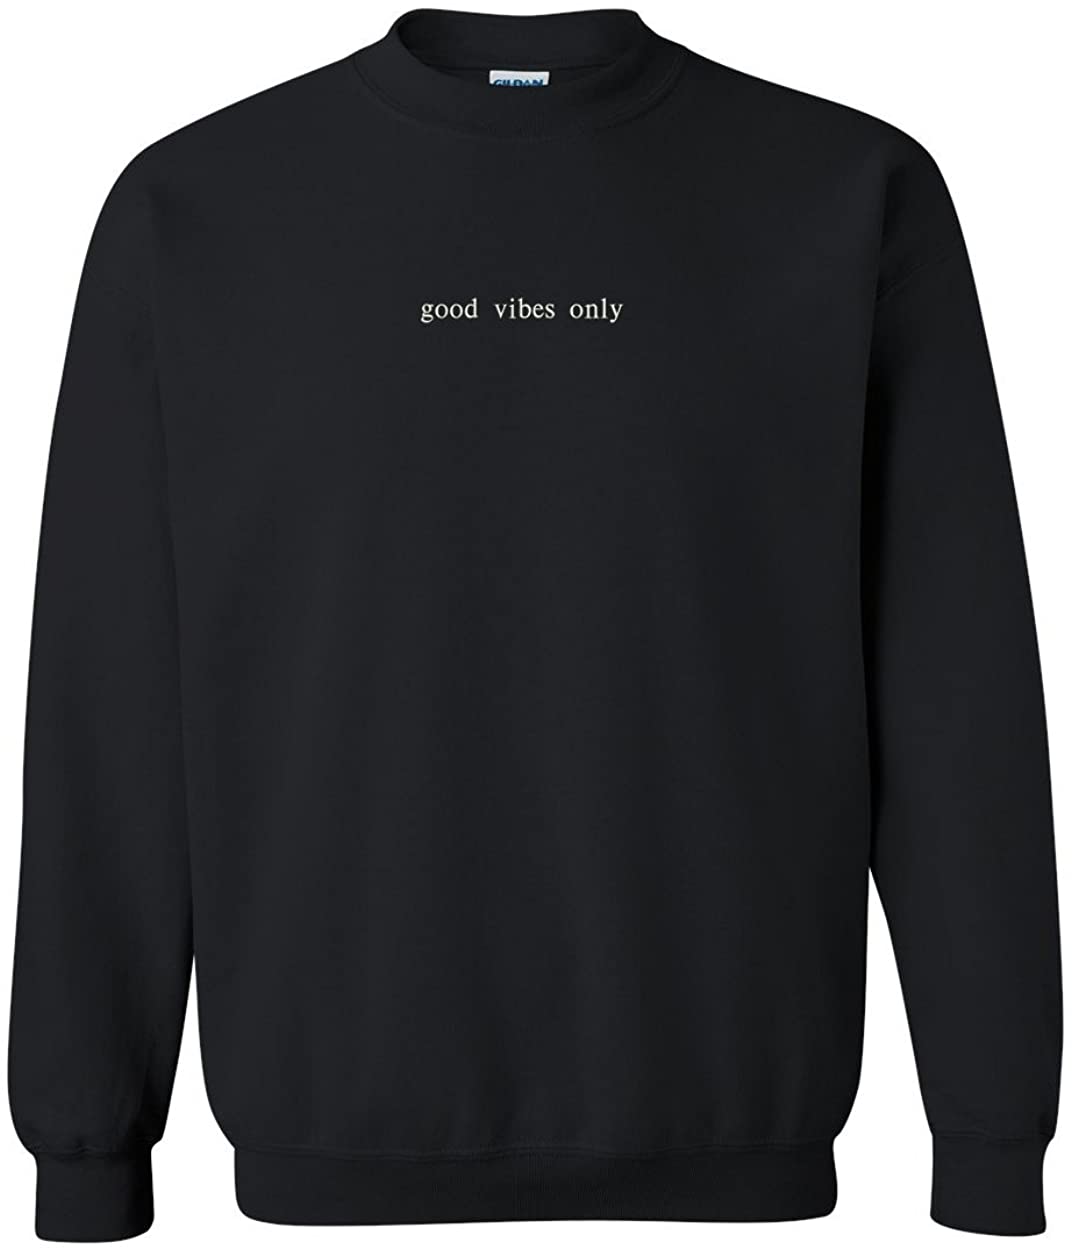 Trendy Apparel Shop Good Vibes Only Embroidered Crewneck Sweatshirt